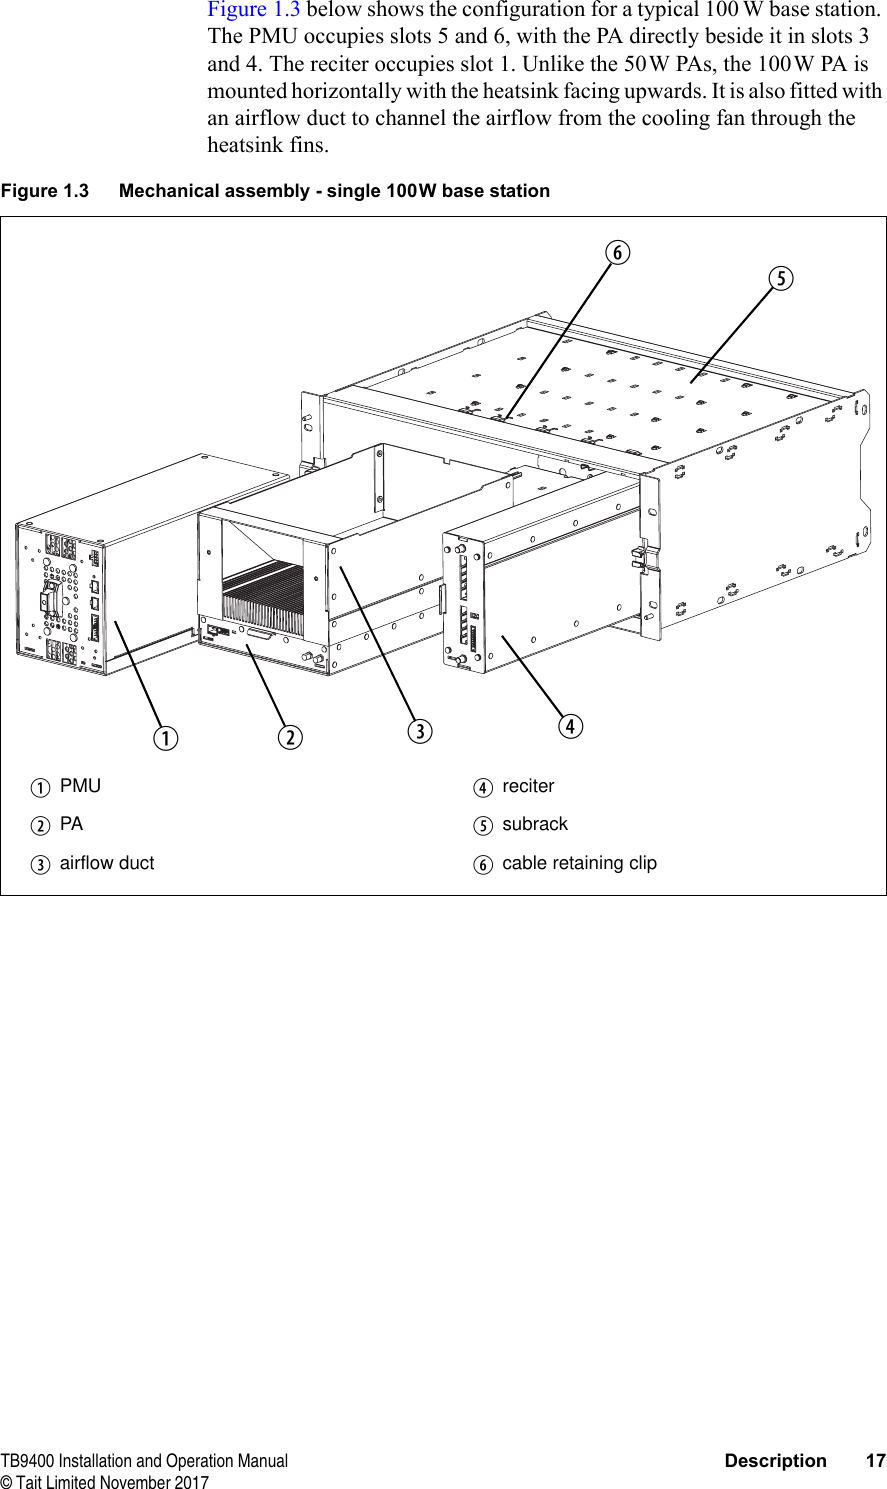  TB9400 Installation and Operation Manual Description 17© Tait Limited November 2017Figure 1.3 below shows the configuration for a typical 100 W base station. The PMU occupies slots 5 and 6, with the PA directly beside it in slots 3 and 4. The reciter occupies slot 1. Unlike the 50W PAs, the 100W PA is mounted horizontally with the heatsink facing upwards. It is also fitted with an airflow duct to channel the airflow from the cooling fan through the heatsink fins.Figure 1.3 Mechanical assembly - single 100W base stationbPMU erecitercPA fsubrackdairflow duct gcable retaining clipbcdefg